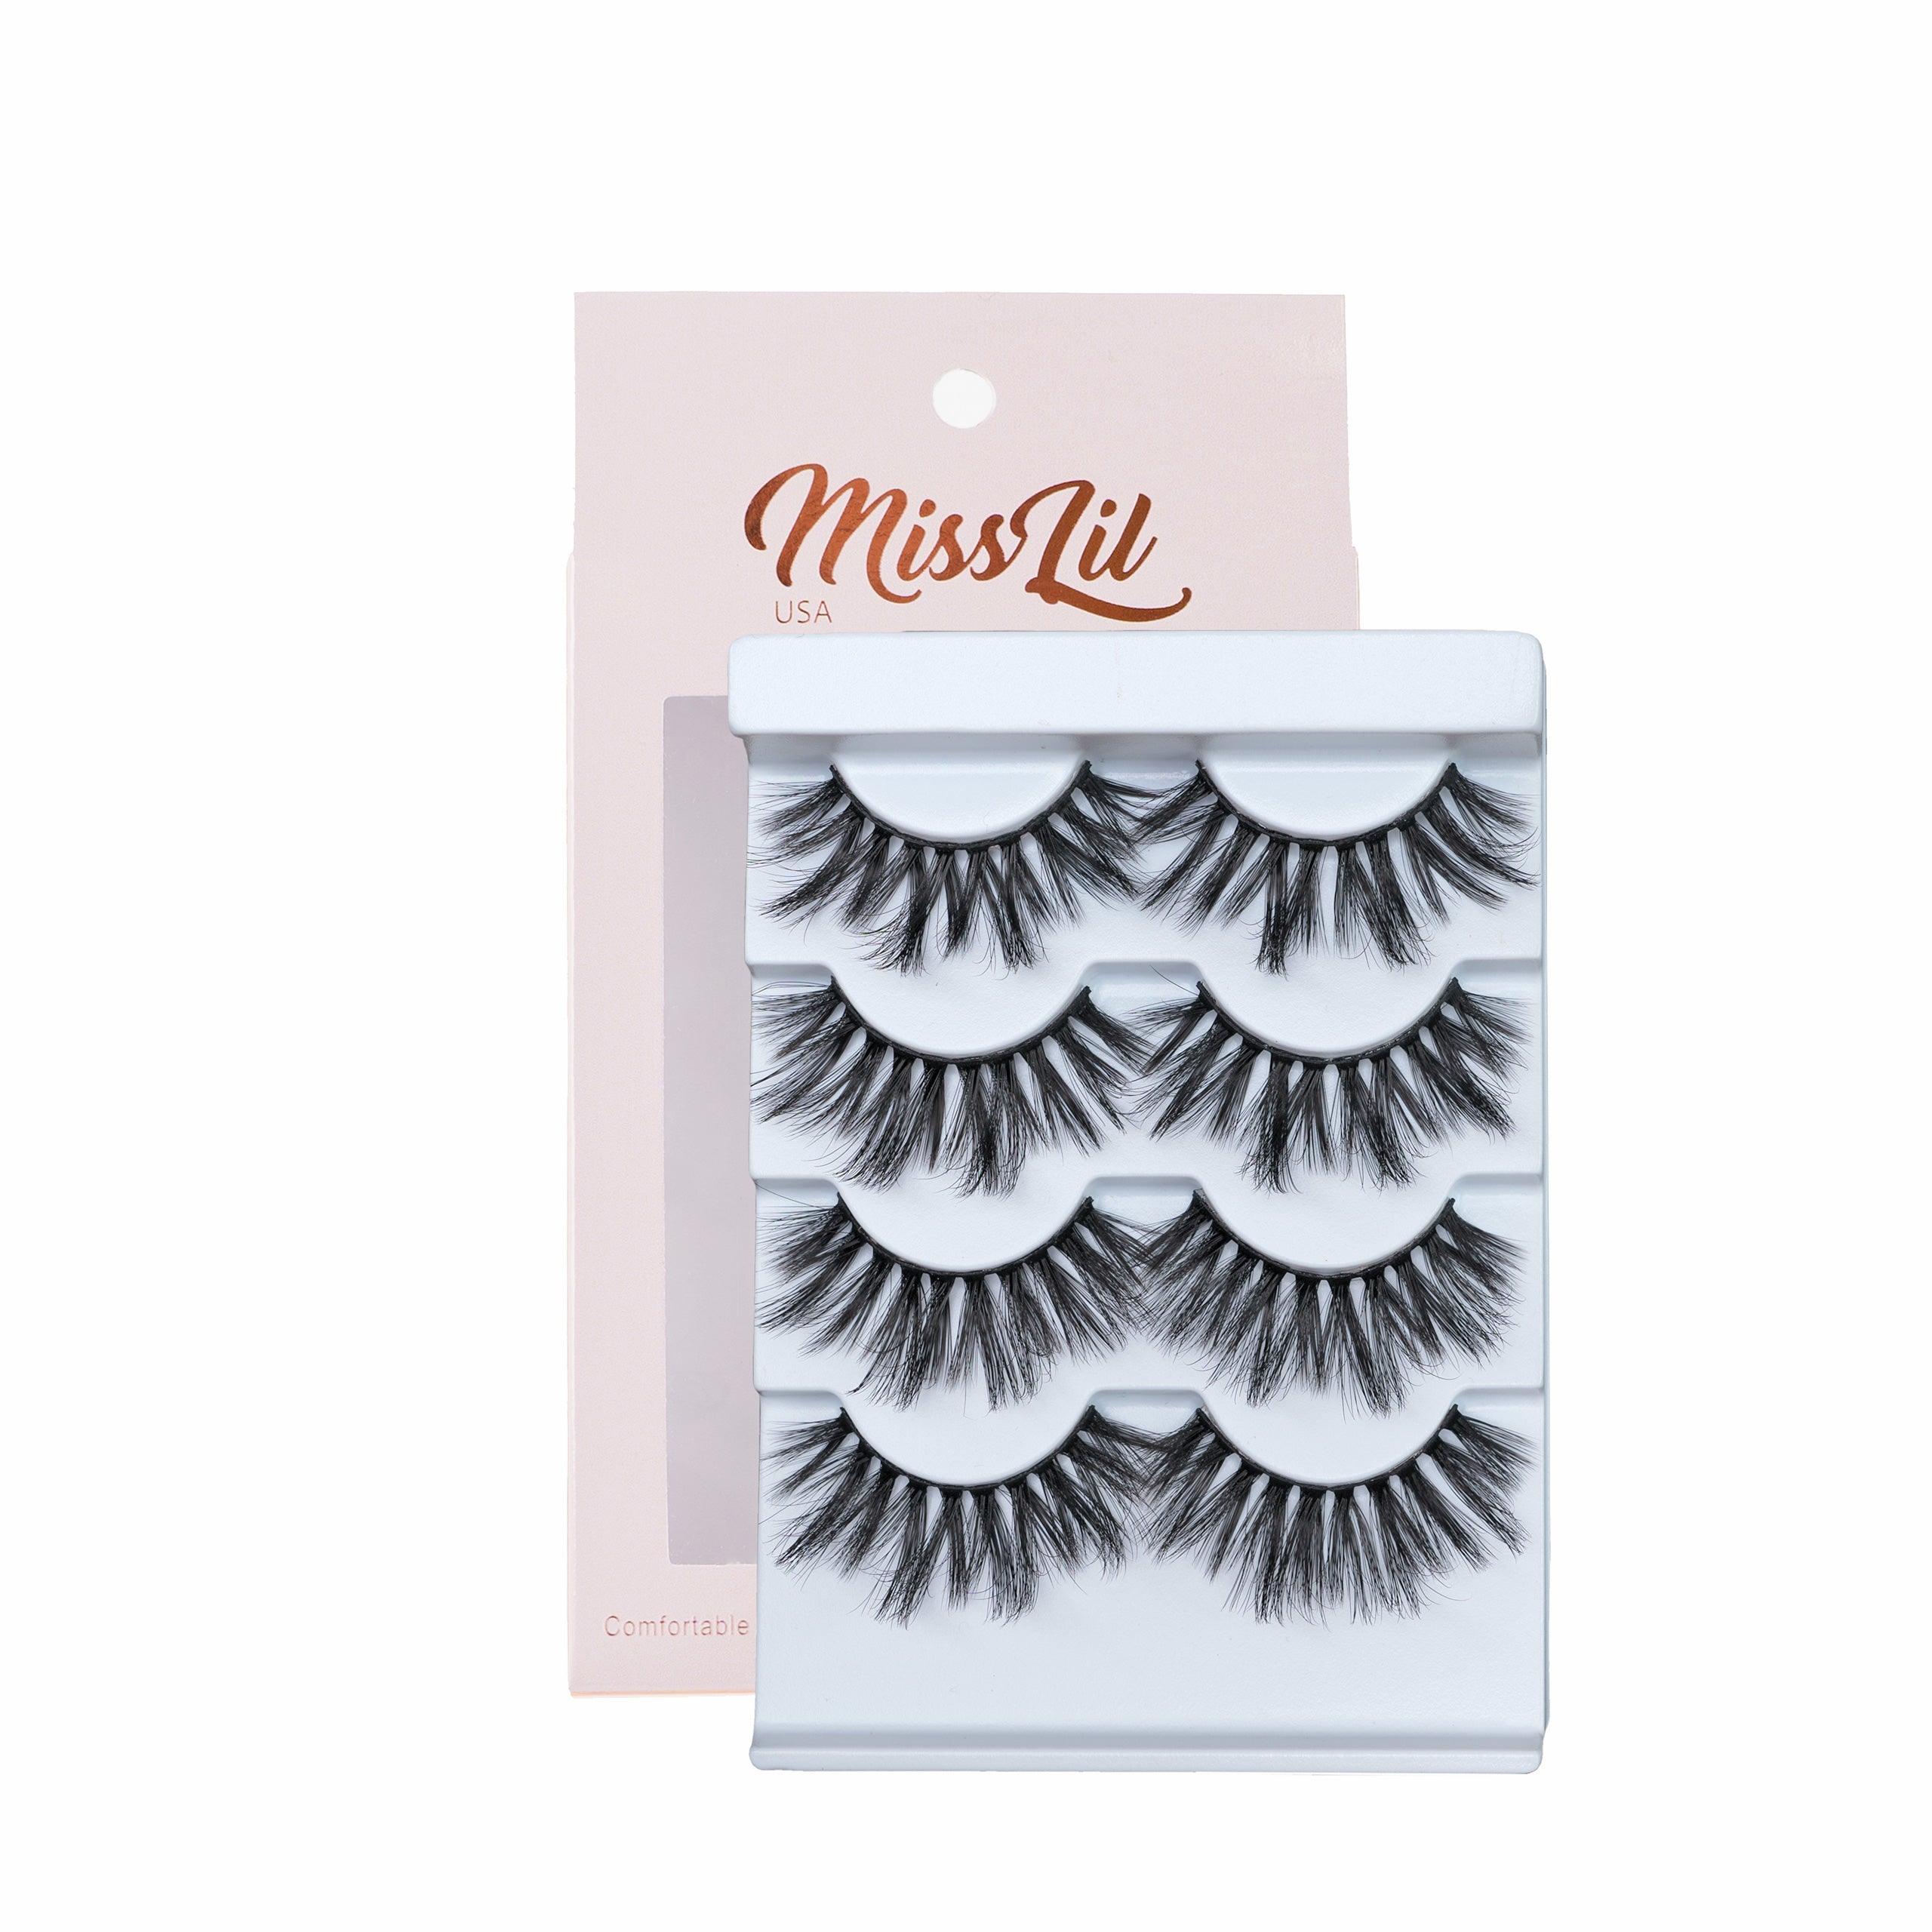 4 Pairs Lashes - Classic Collection #11 (Pack of 12) - Miss Lil USA